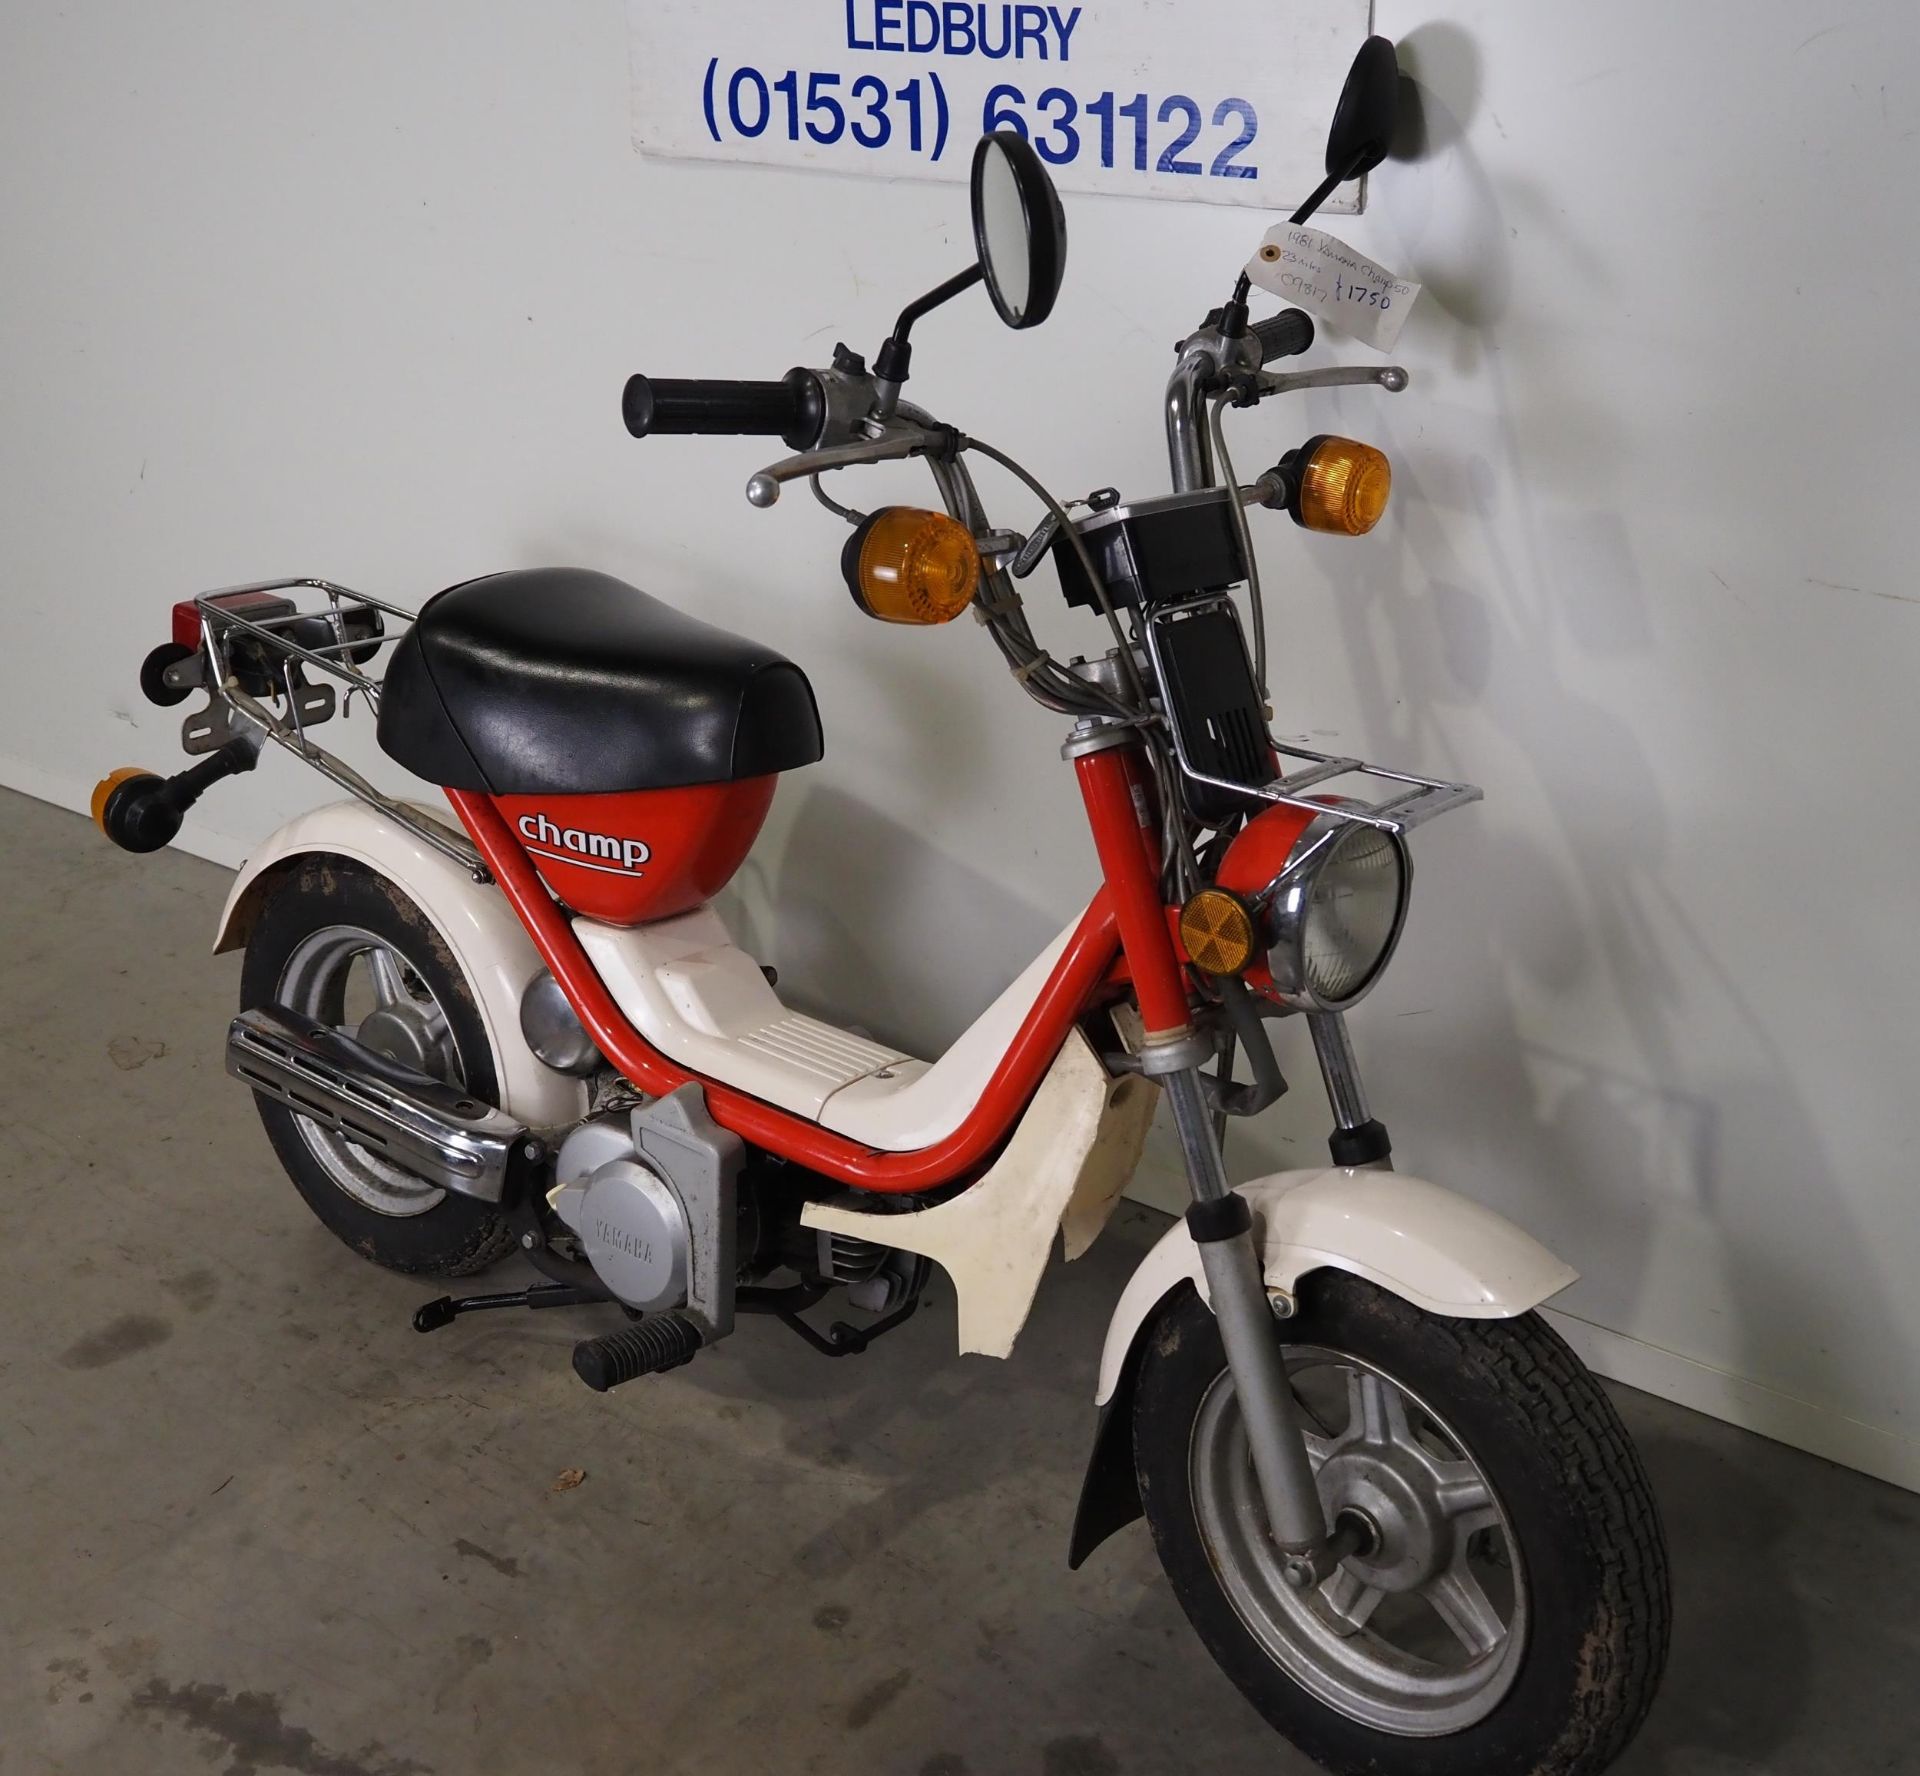 Yamaha Champ 50 moped. 1981. 50cc. Showing 23 miles from new. Has Nova number. Runs but requires - Image 3 of 5